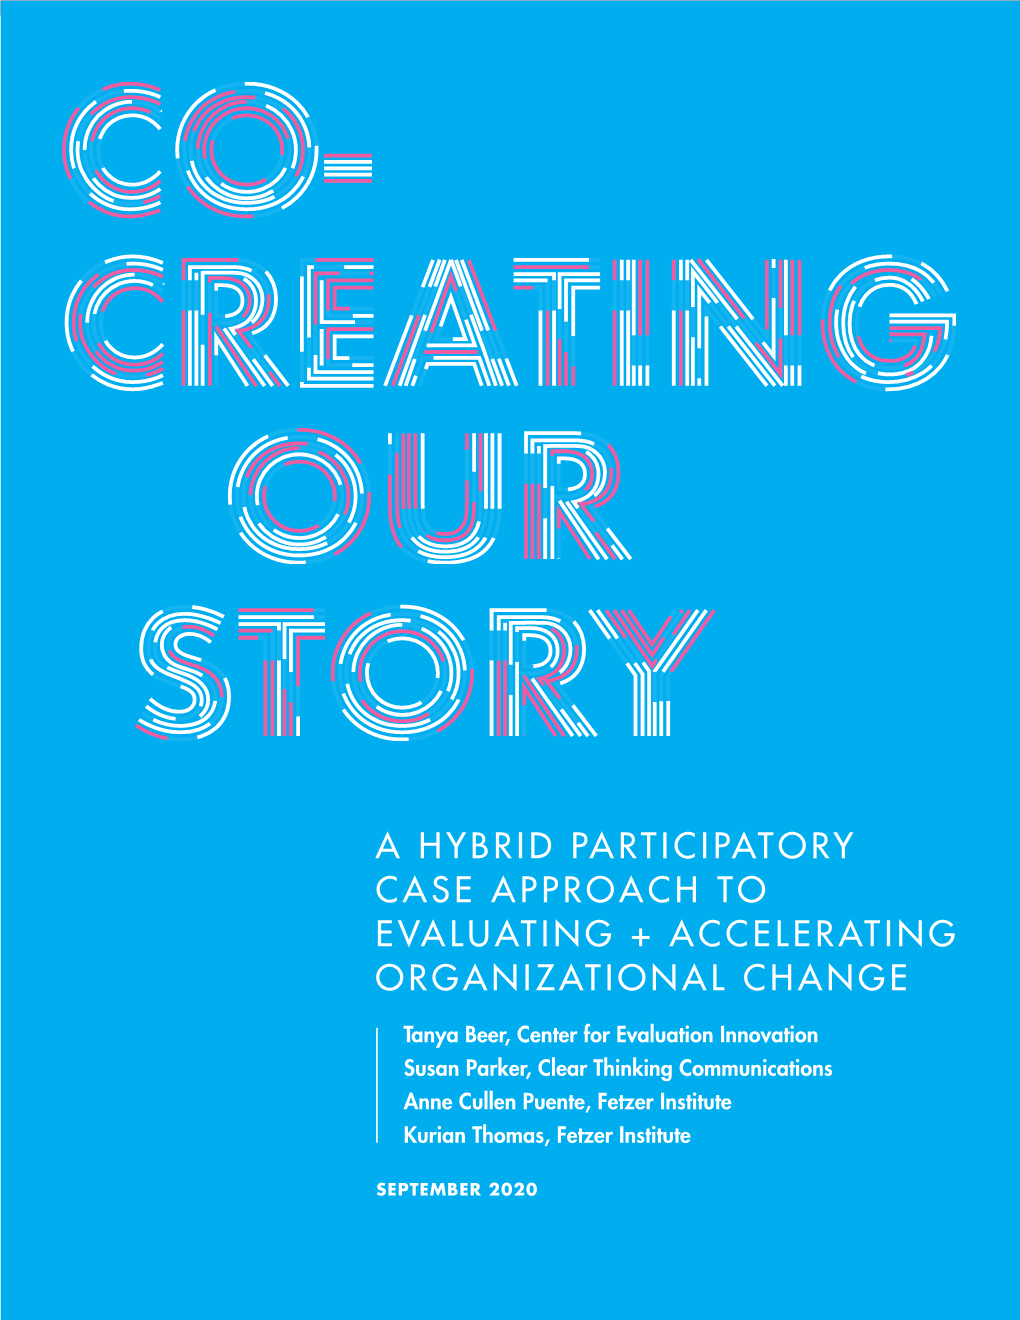 A Hybrid Participatory Case Approach to Evaluating +